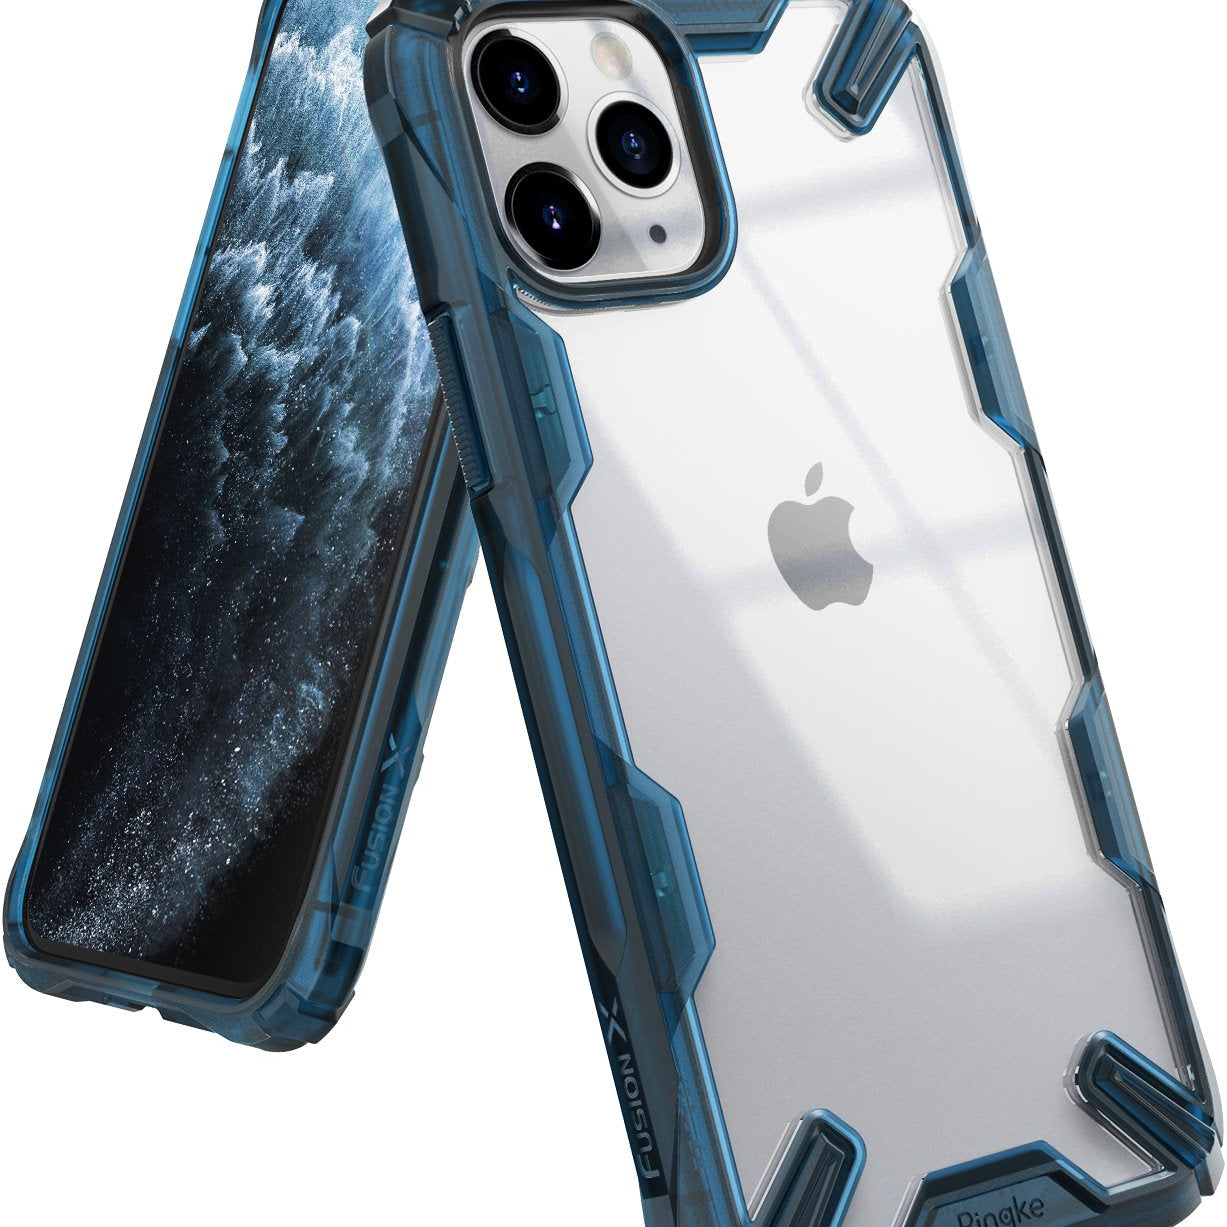 Ringke Fusion X Designed for apple iPhone 11 Pro MAX Case space blue